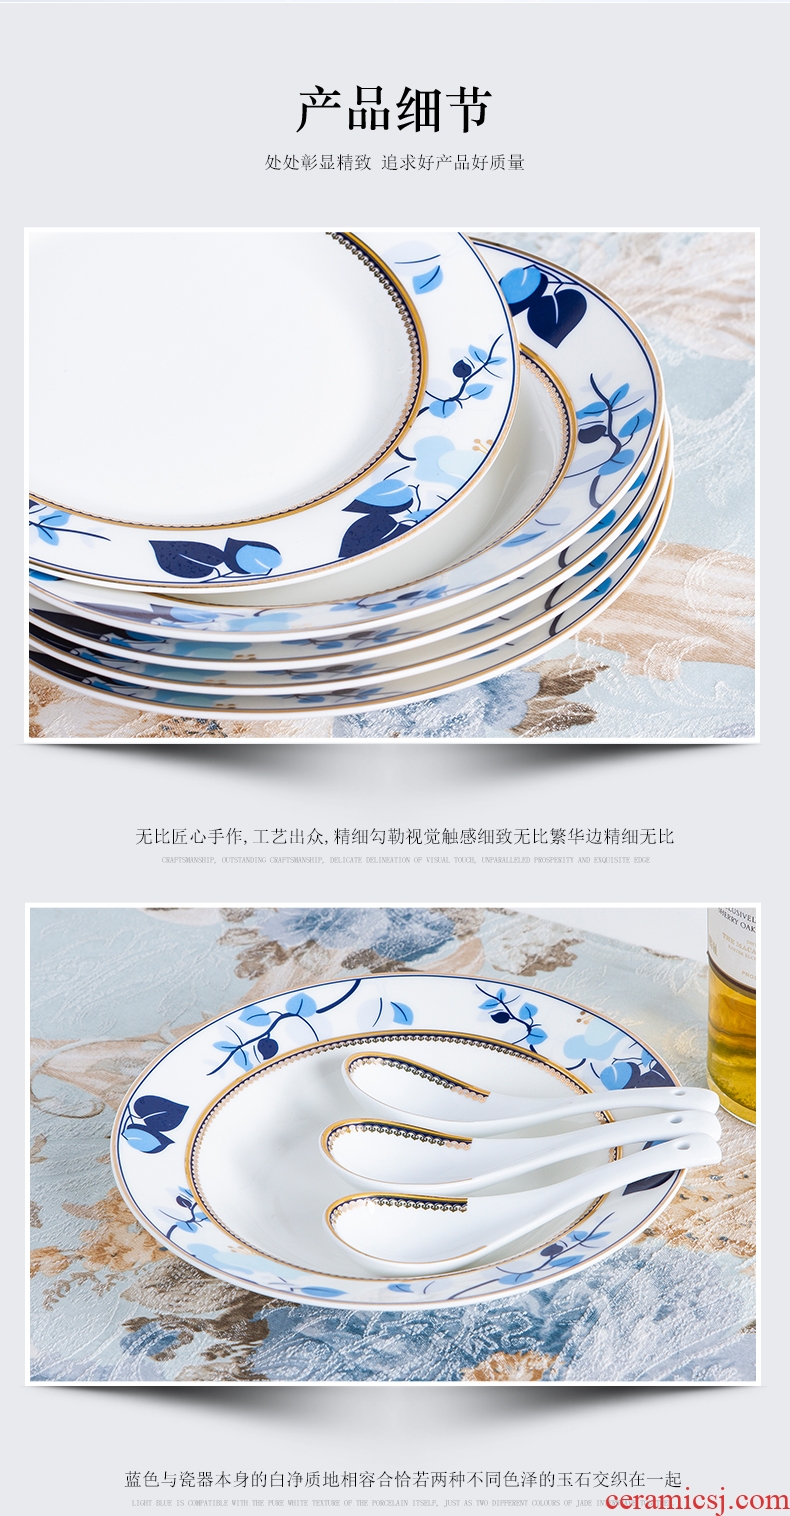 Red leaves one single home to eat food tableware chopsticks sets (one bowl of ceramic European dishes